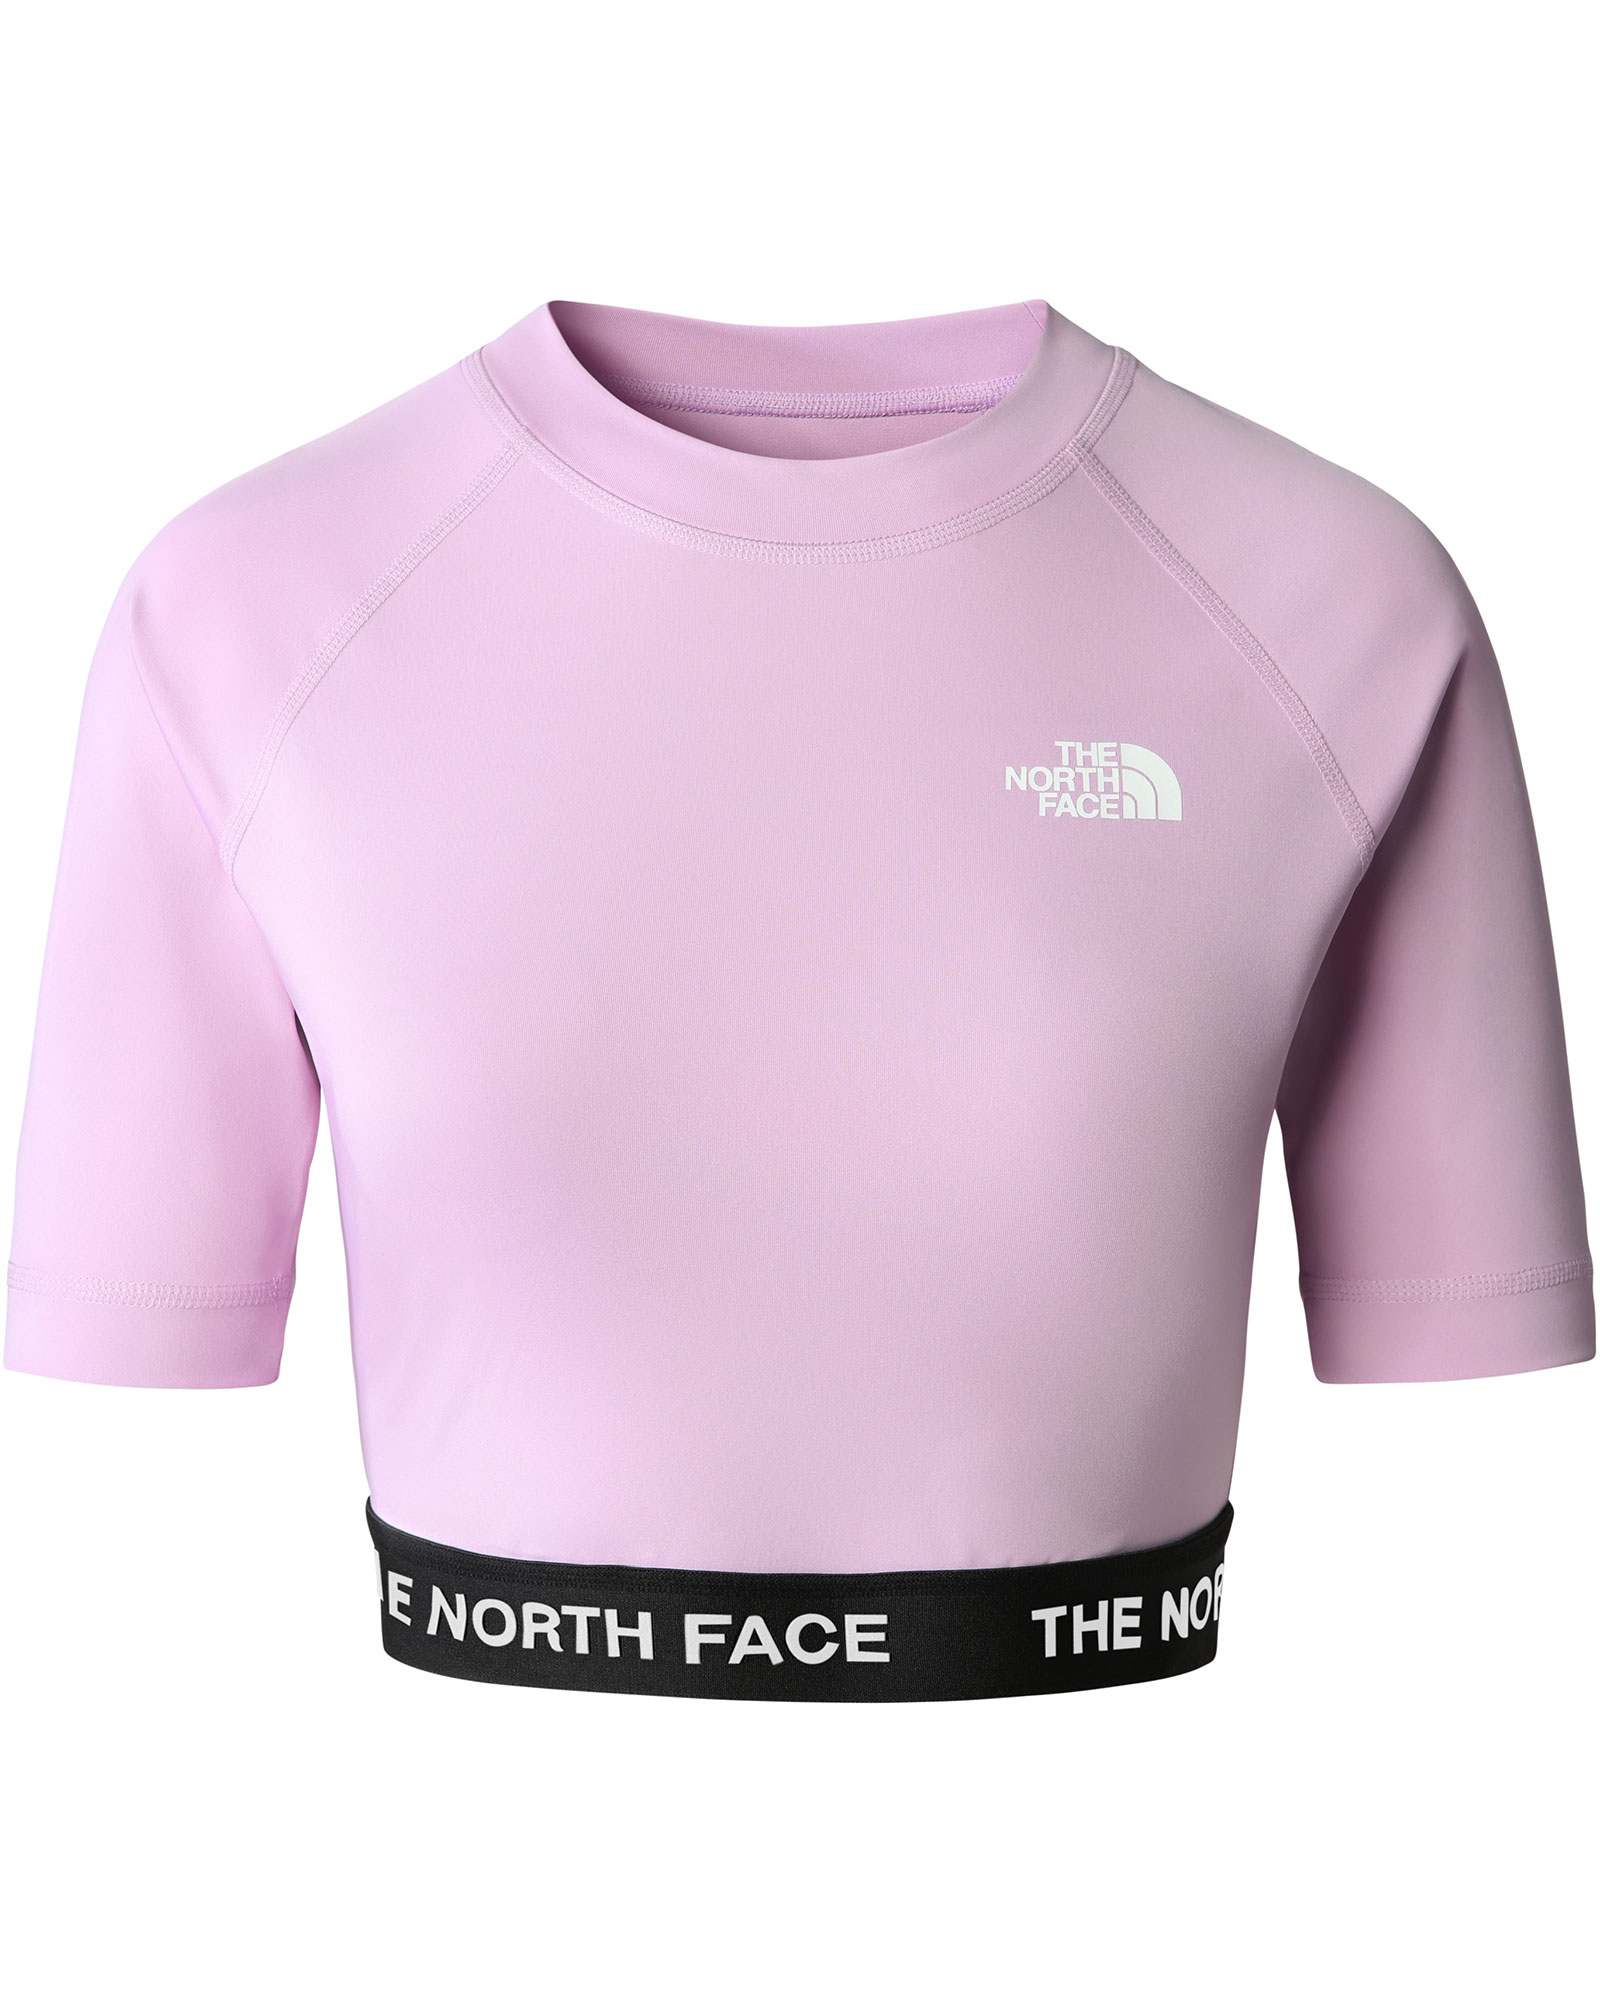 The North Face Women’s Crop Performance T Shirt - Lupine XS